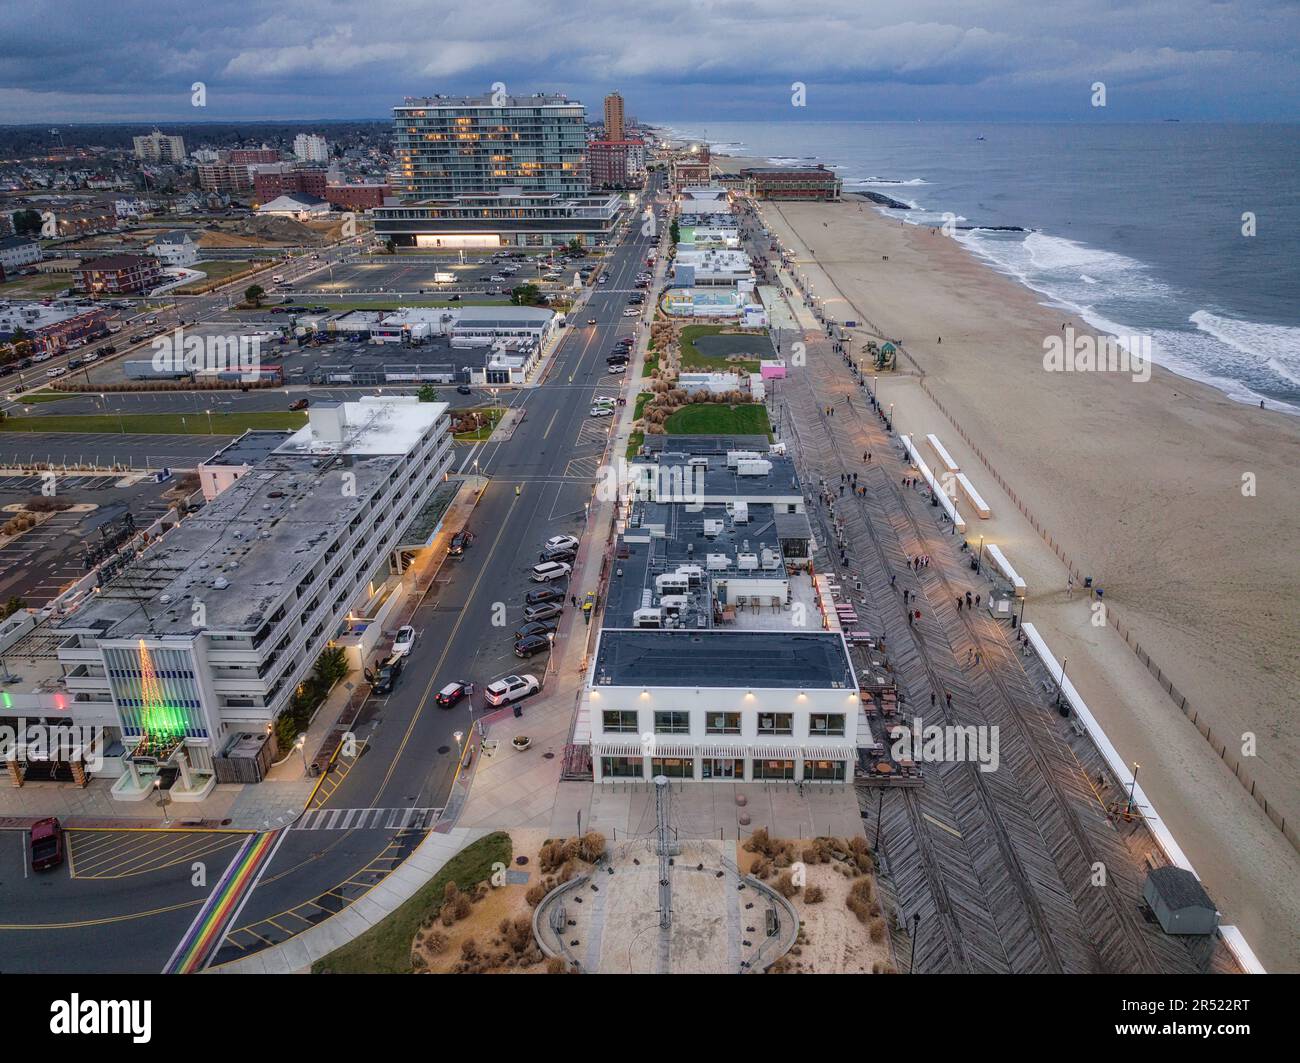 Asbury Park Boardwalk Aerial - Aerial view to the historic Asbury Park's Carousel House with Asbury Park Beach and boardwalk in the background.  This Stock Photo